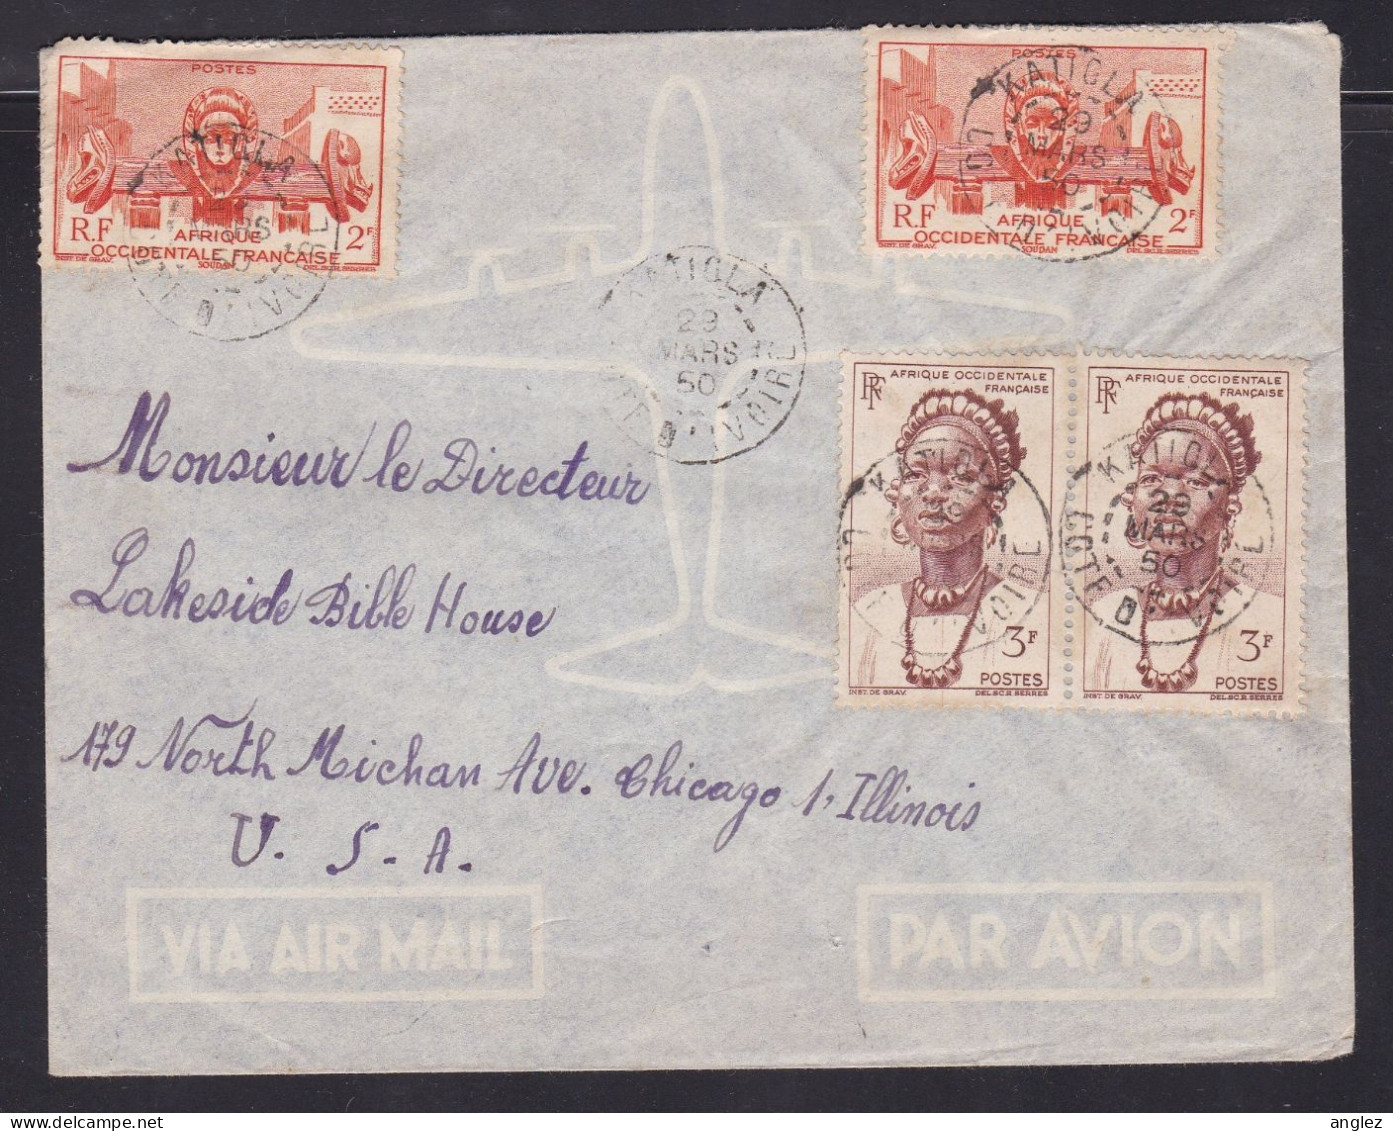 France / AOF / Cote D'Ivoire / Ivory Coast - 1950 Airmail Cover Katiola To Chicago USA - Covers & Documents